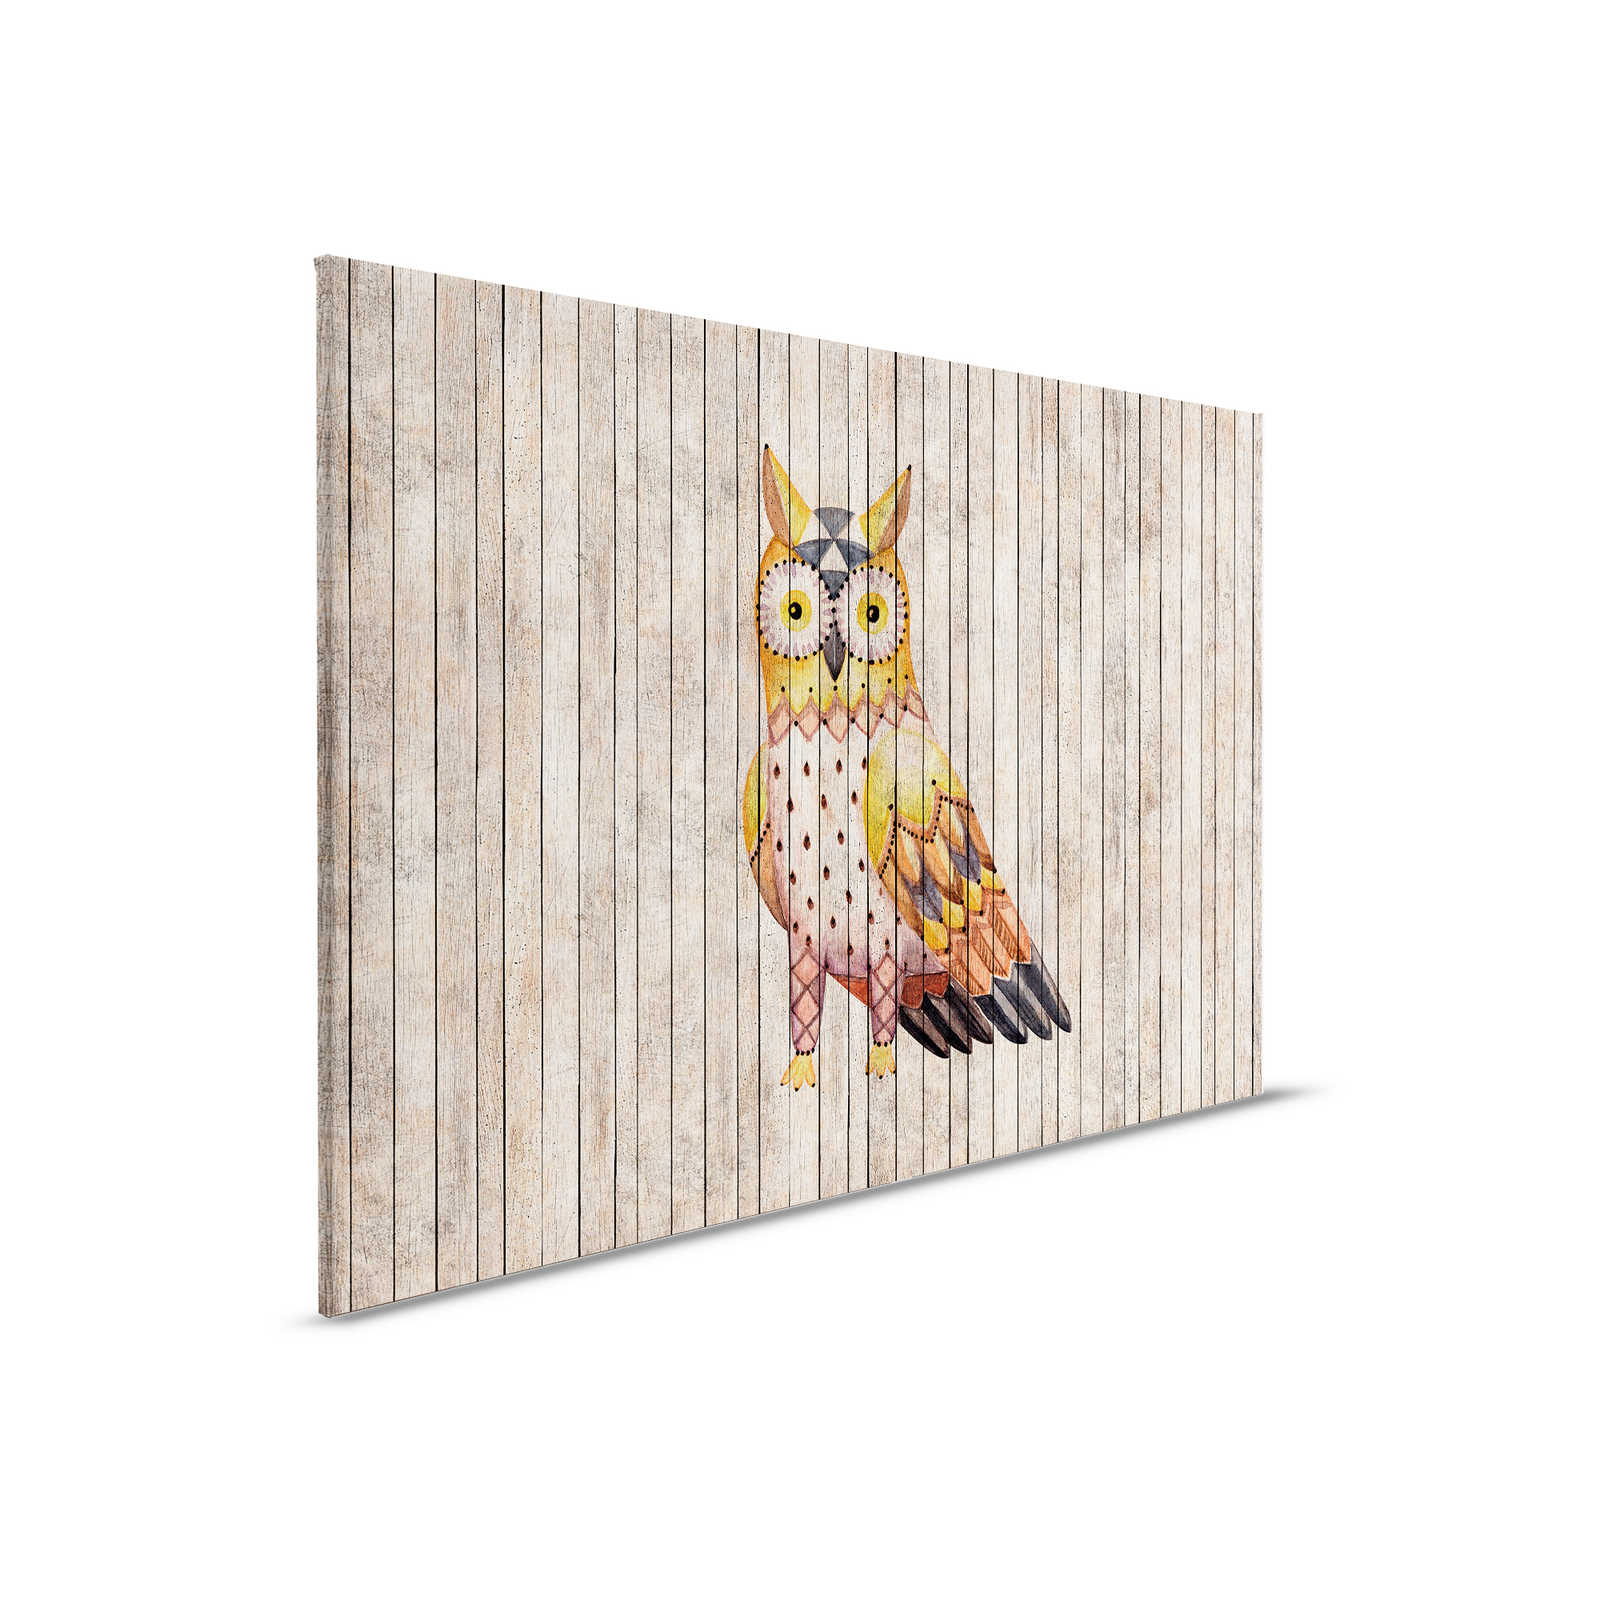         Fairy tale 1 - Wooden board wall with owl canvas picture - 0.90 m x 0.60 m
    